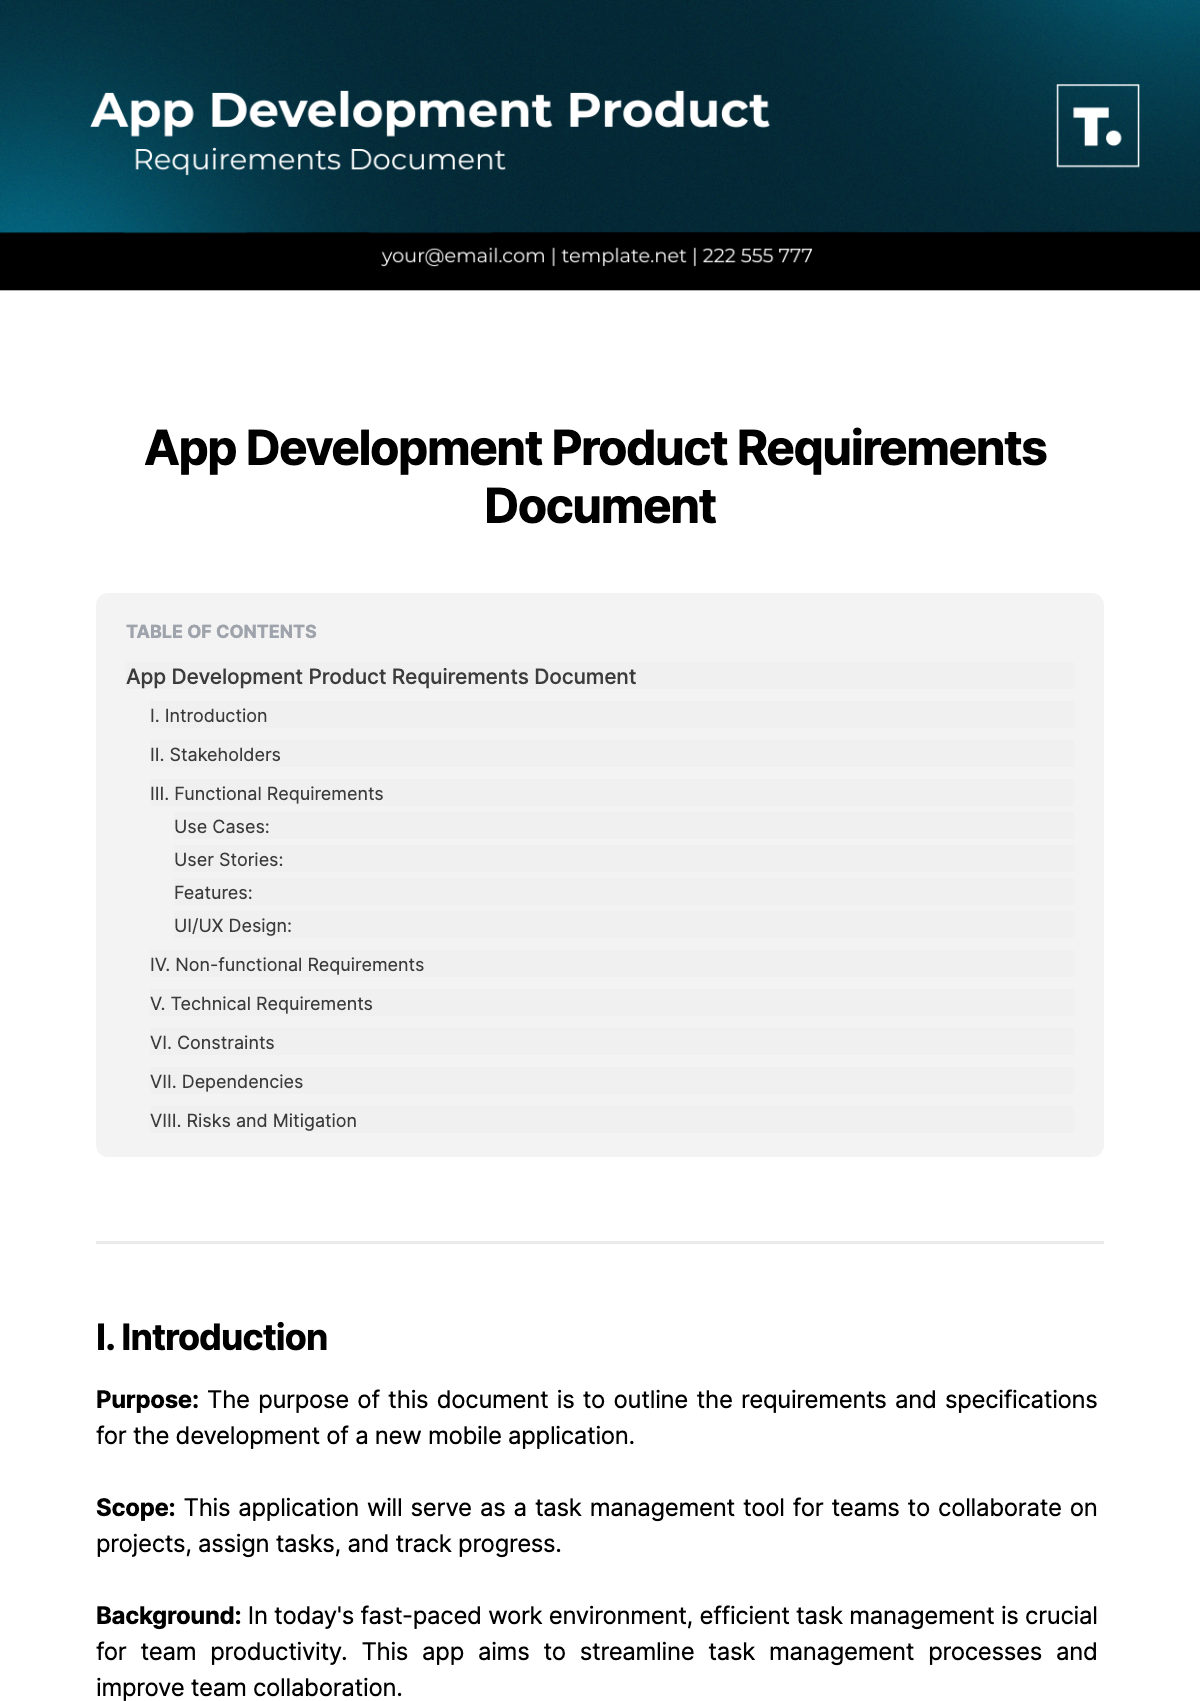 Free App Development Product Requirements Document Template